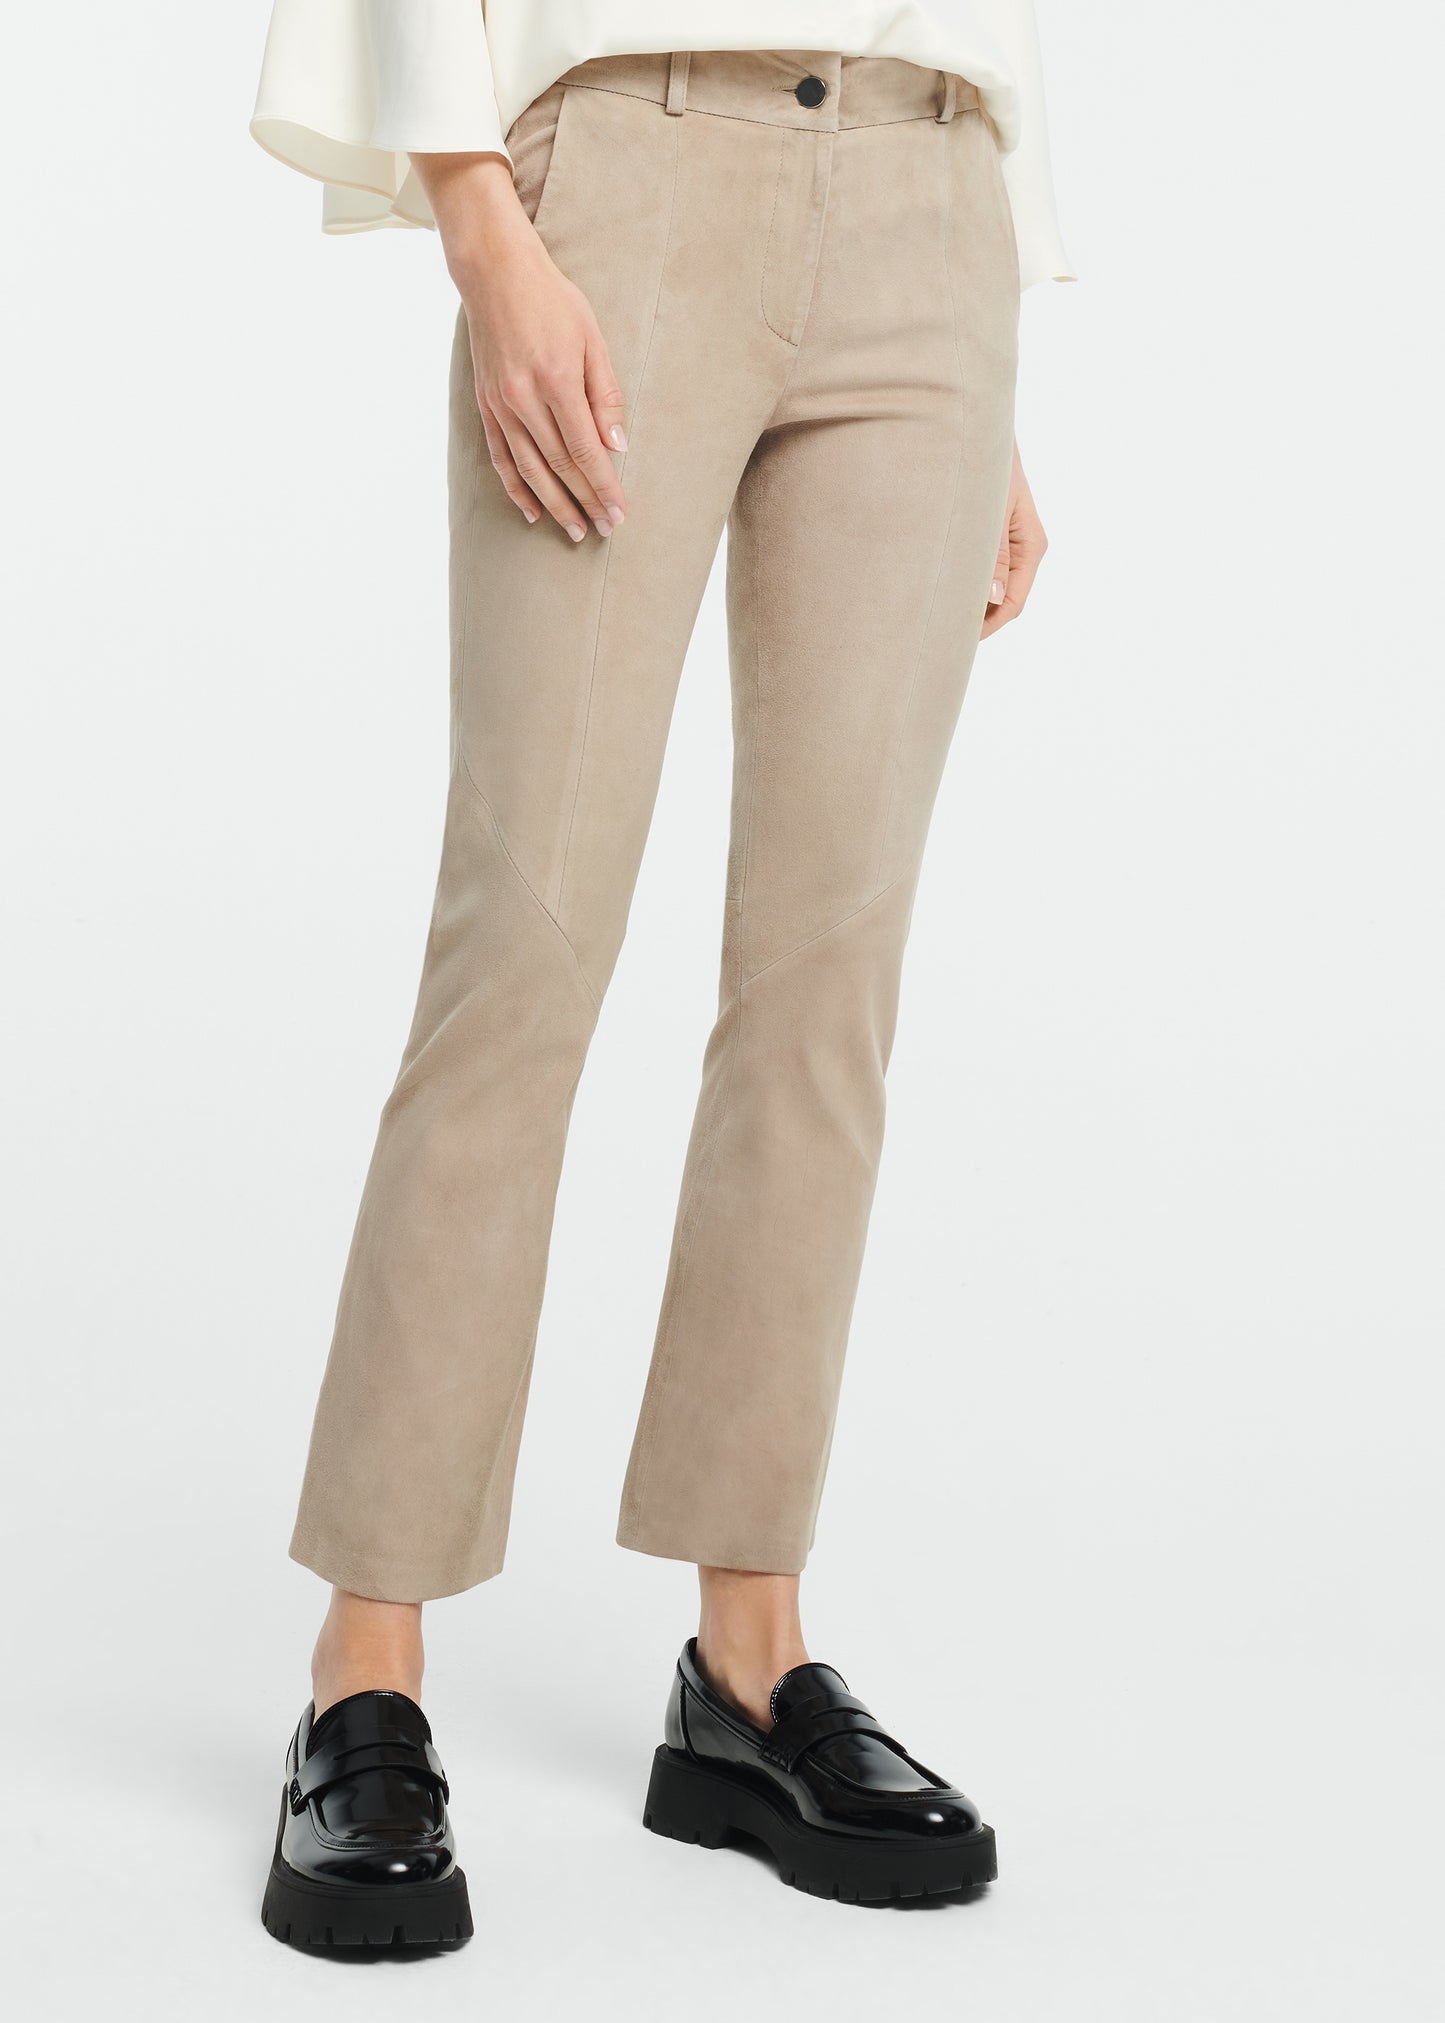 DEANNA Leather Stretch Trousers